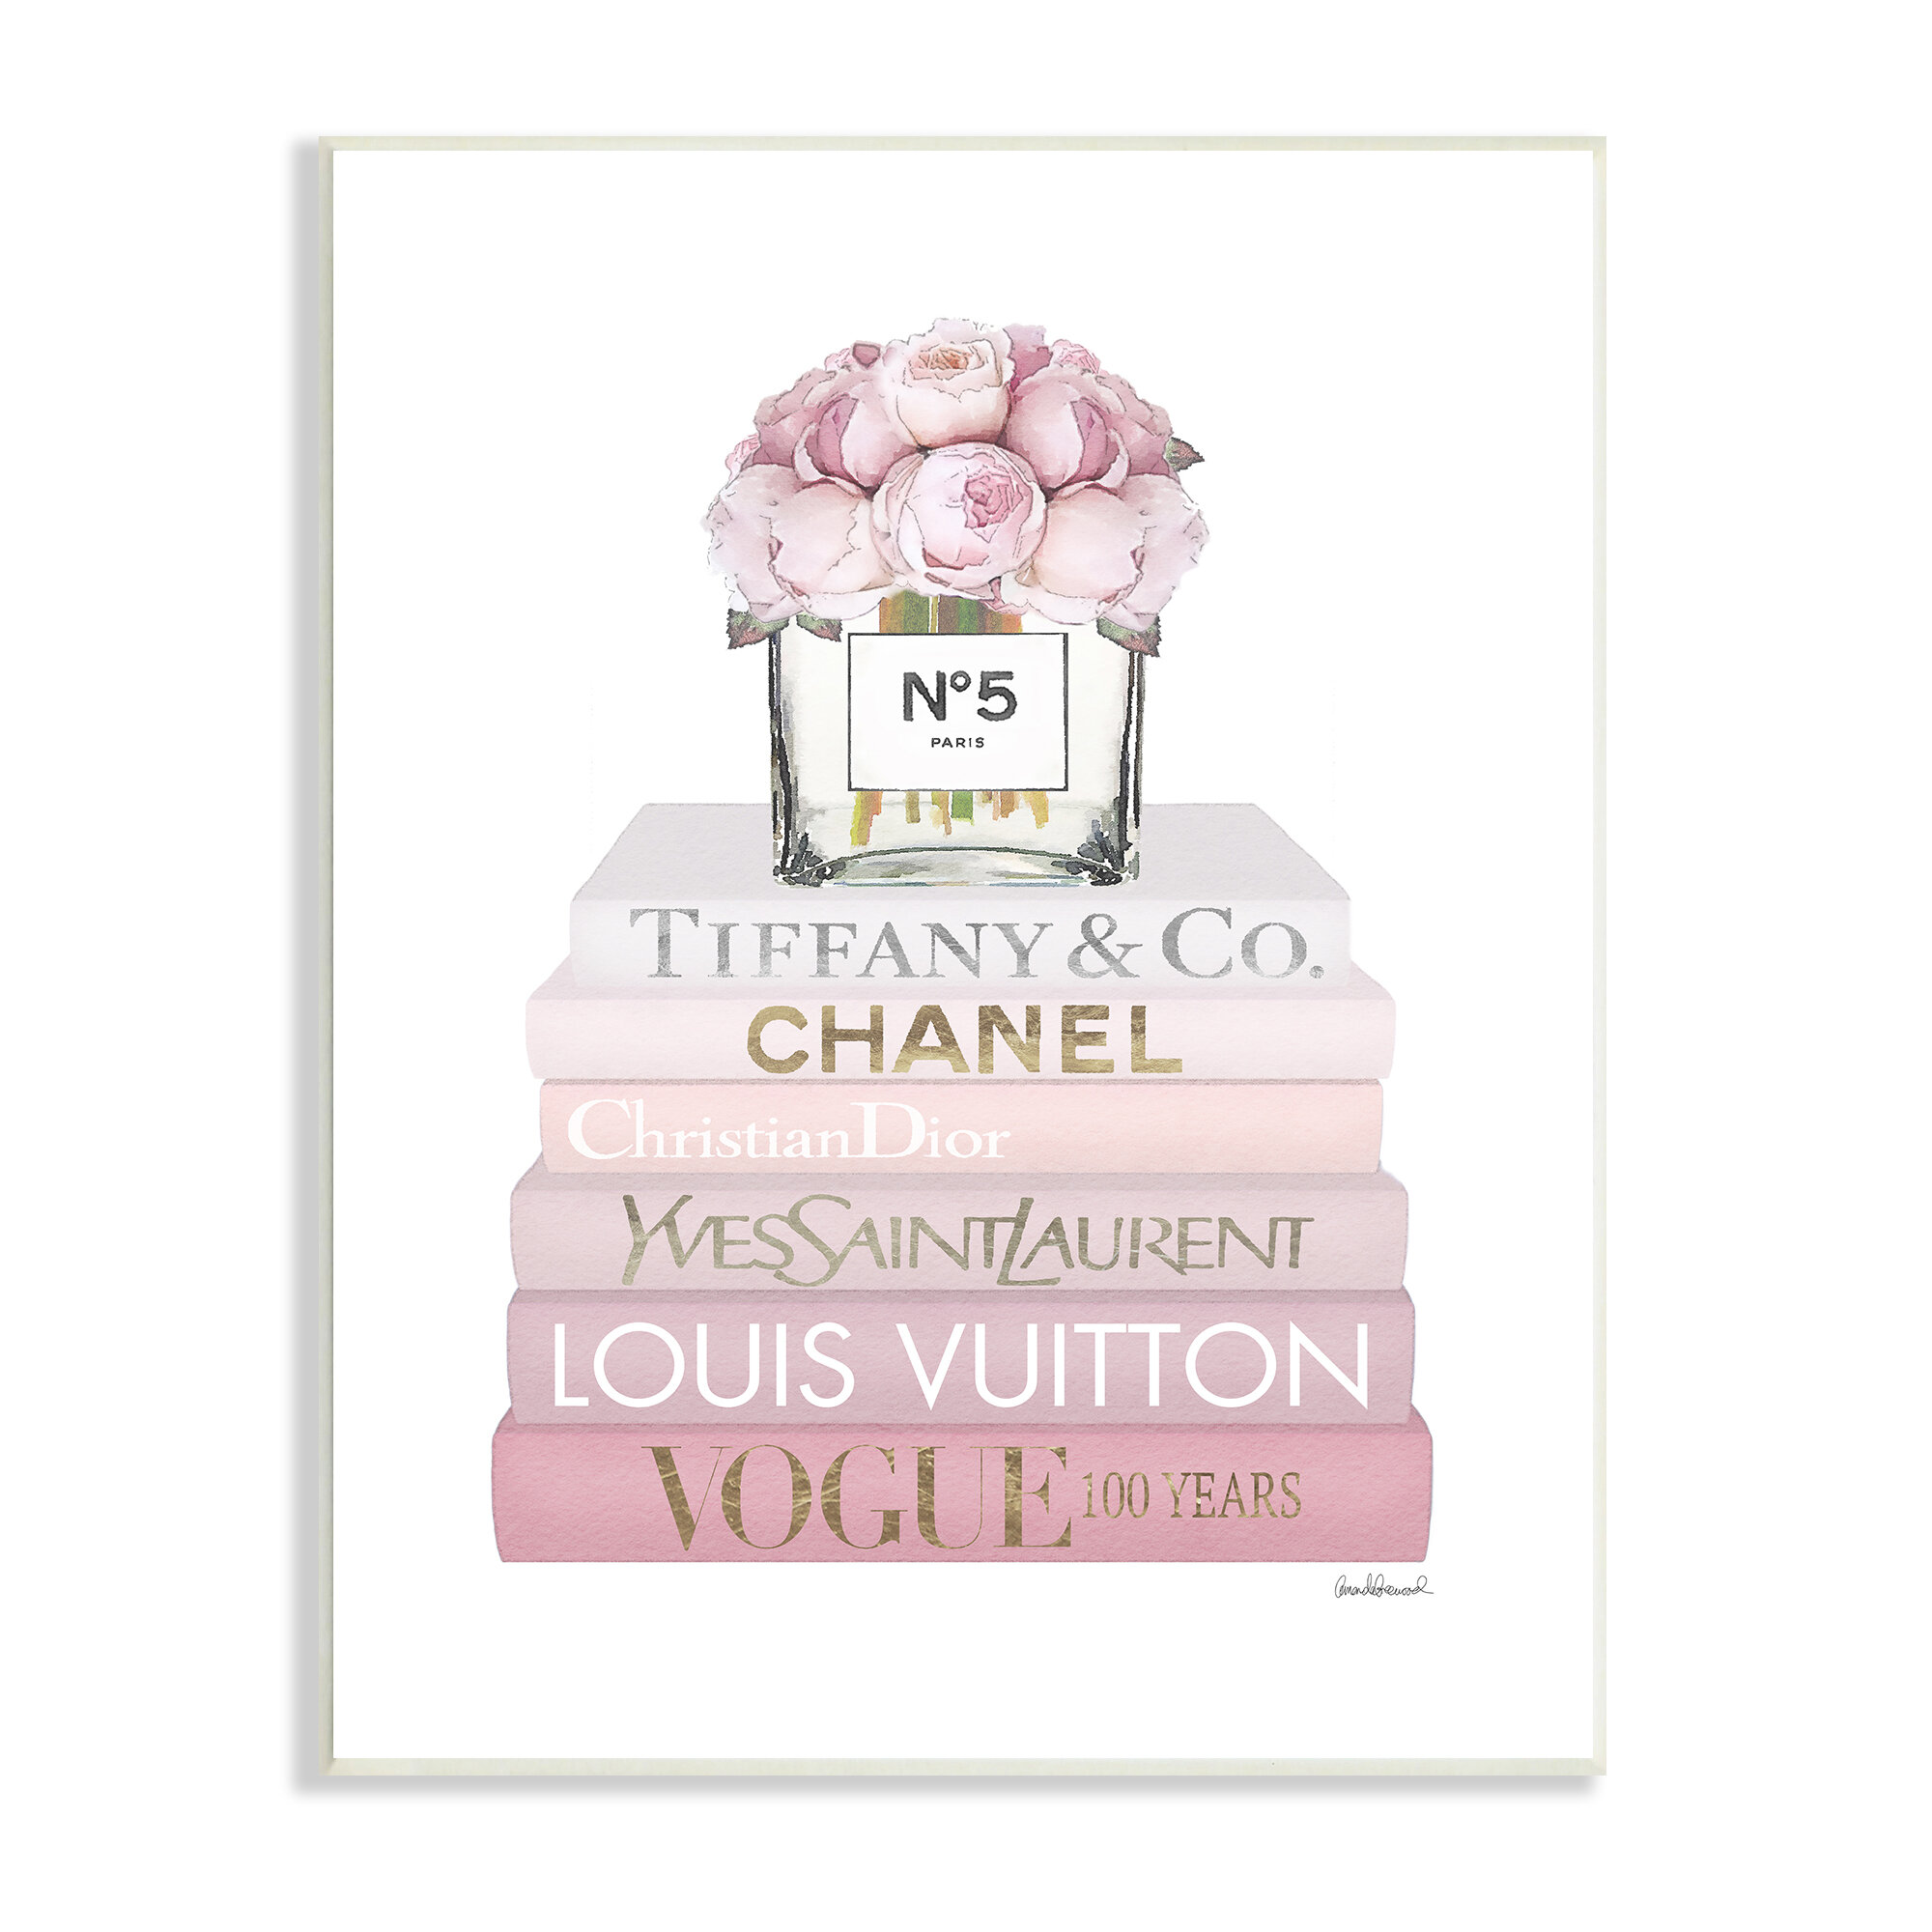 The Stupell Home Decor Collection Pink Fashion Heals with Glam Books and  Rose by Amanda Greenwood Floater Frame Nature Wall Art Print 21 in. x 17  in. ab-574_ffb_16x20 - The Home Depot